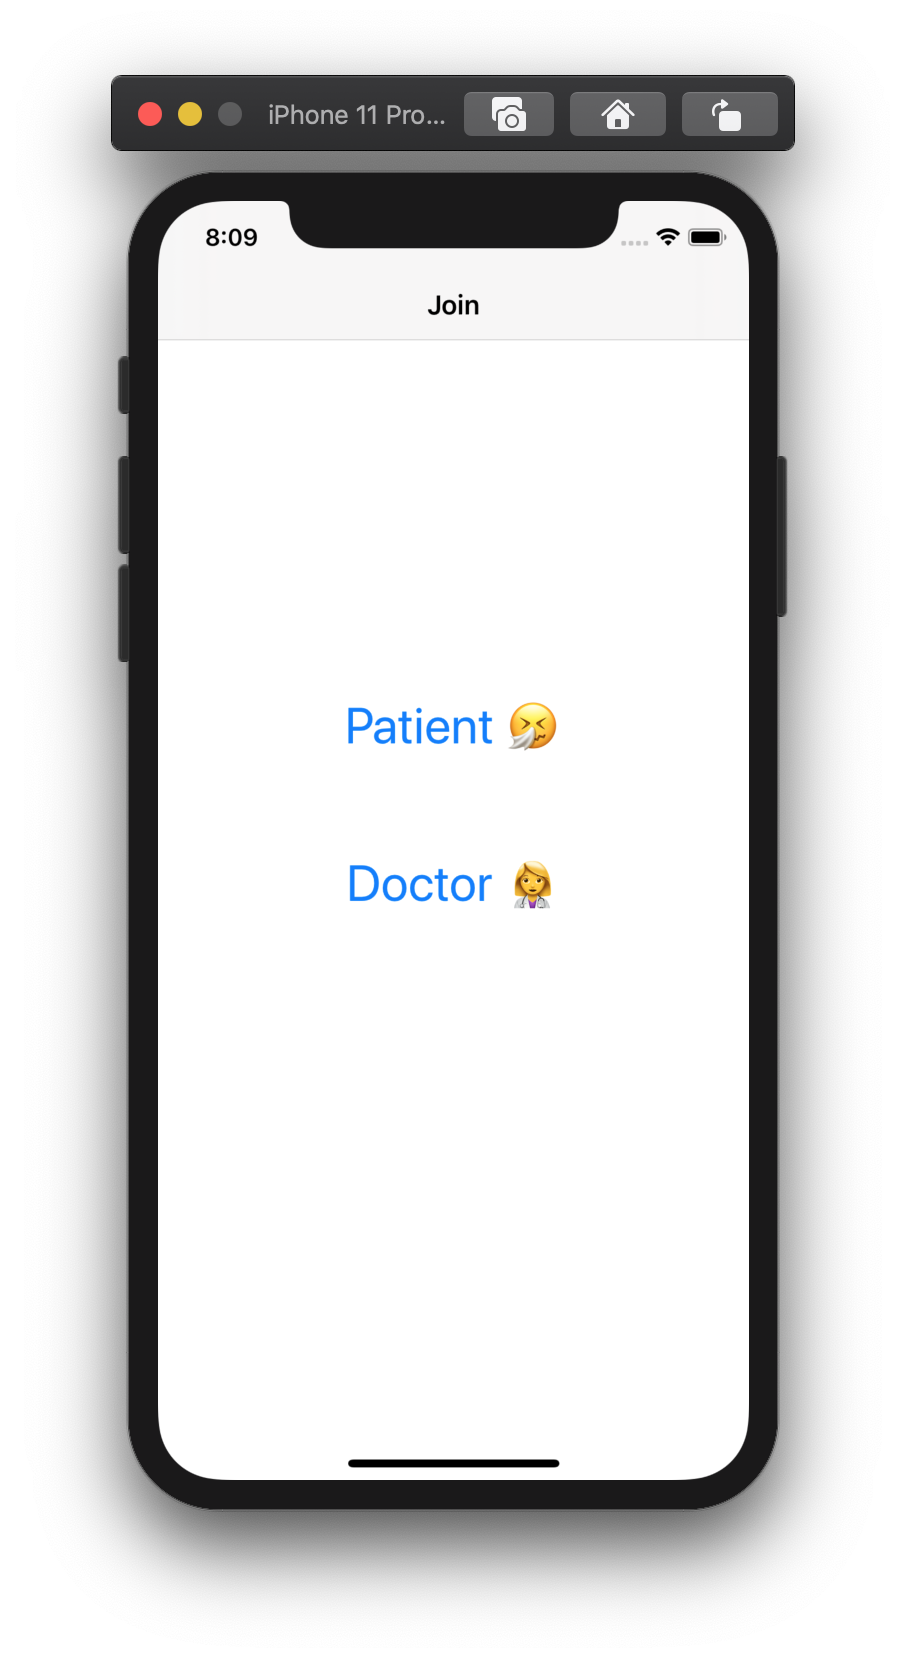 Screenshot shows an app with two buttons, one to join as the patient, and the other to join as the doctor